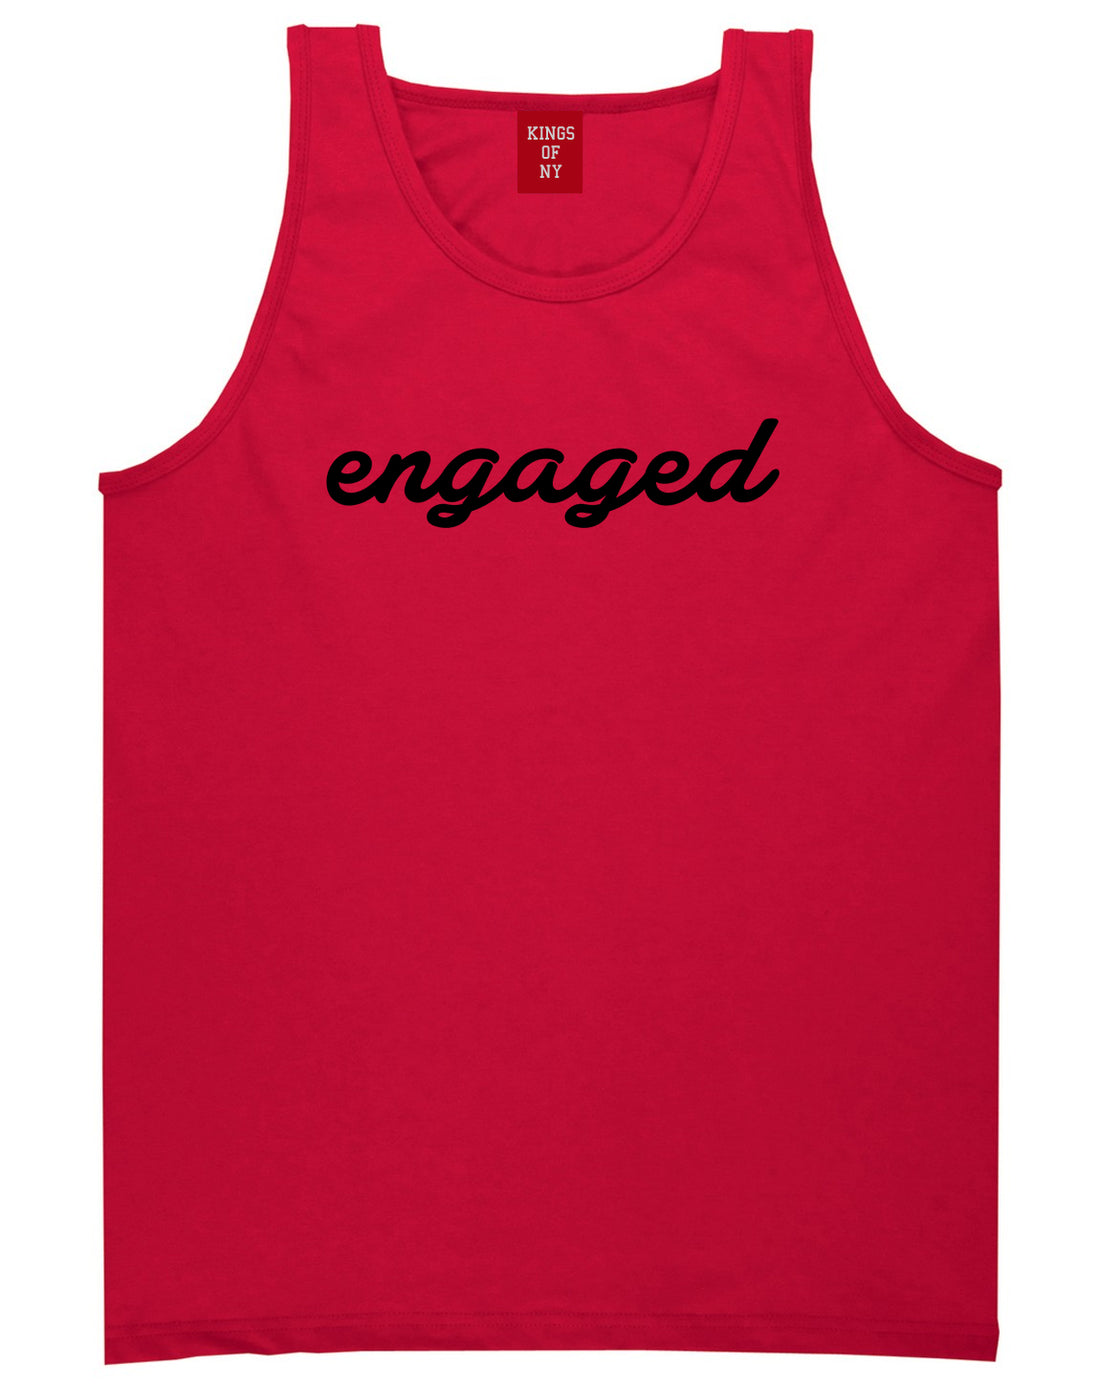 Engaged_Script Mens Red Tank Top Shirt by Kings Of NY